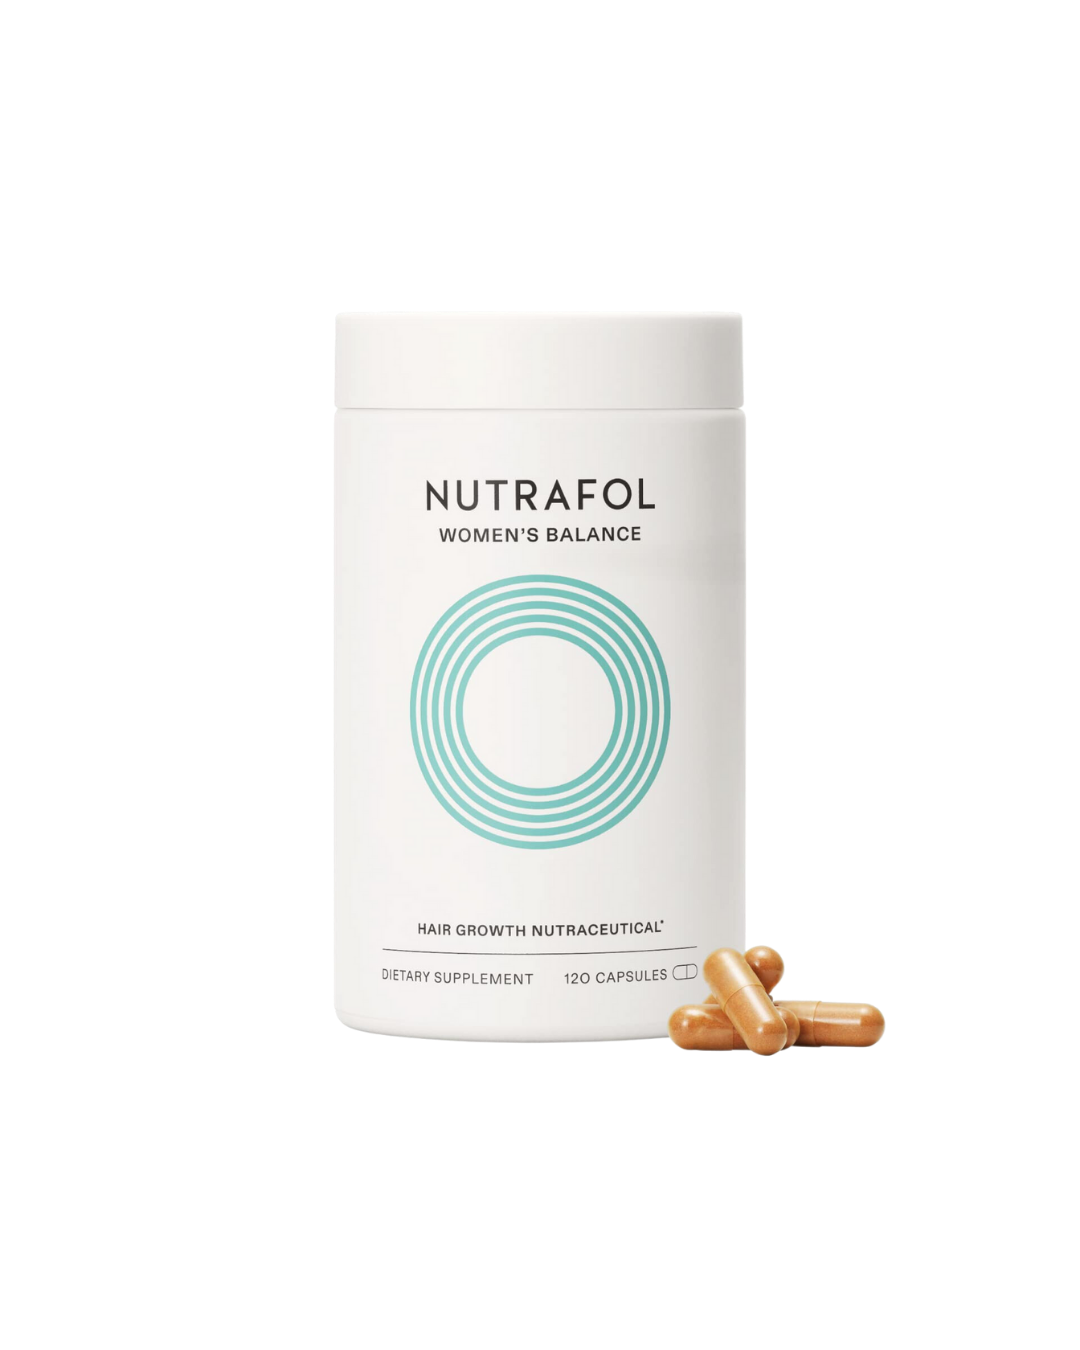 Nutrafol Women's Balance Hair Growth Supplements, Ages 45+ - 3 Month Supply